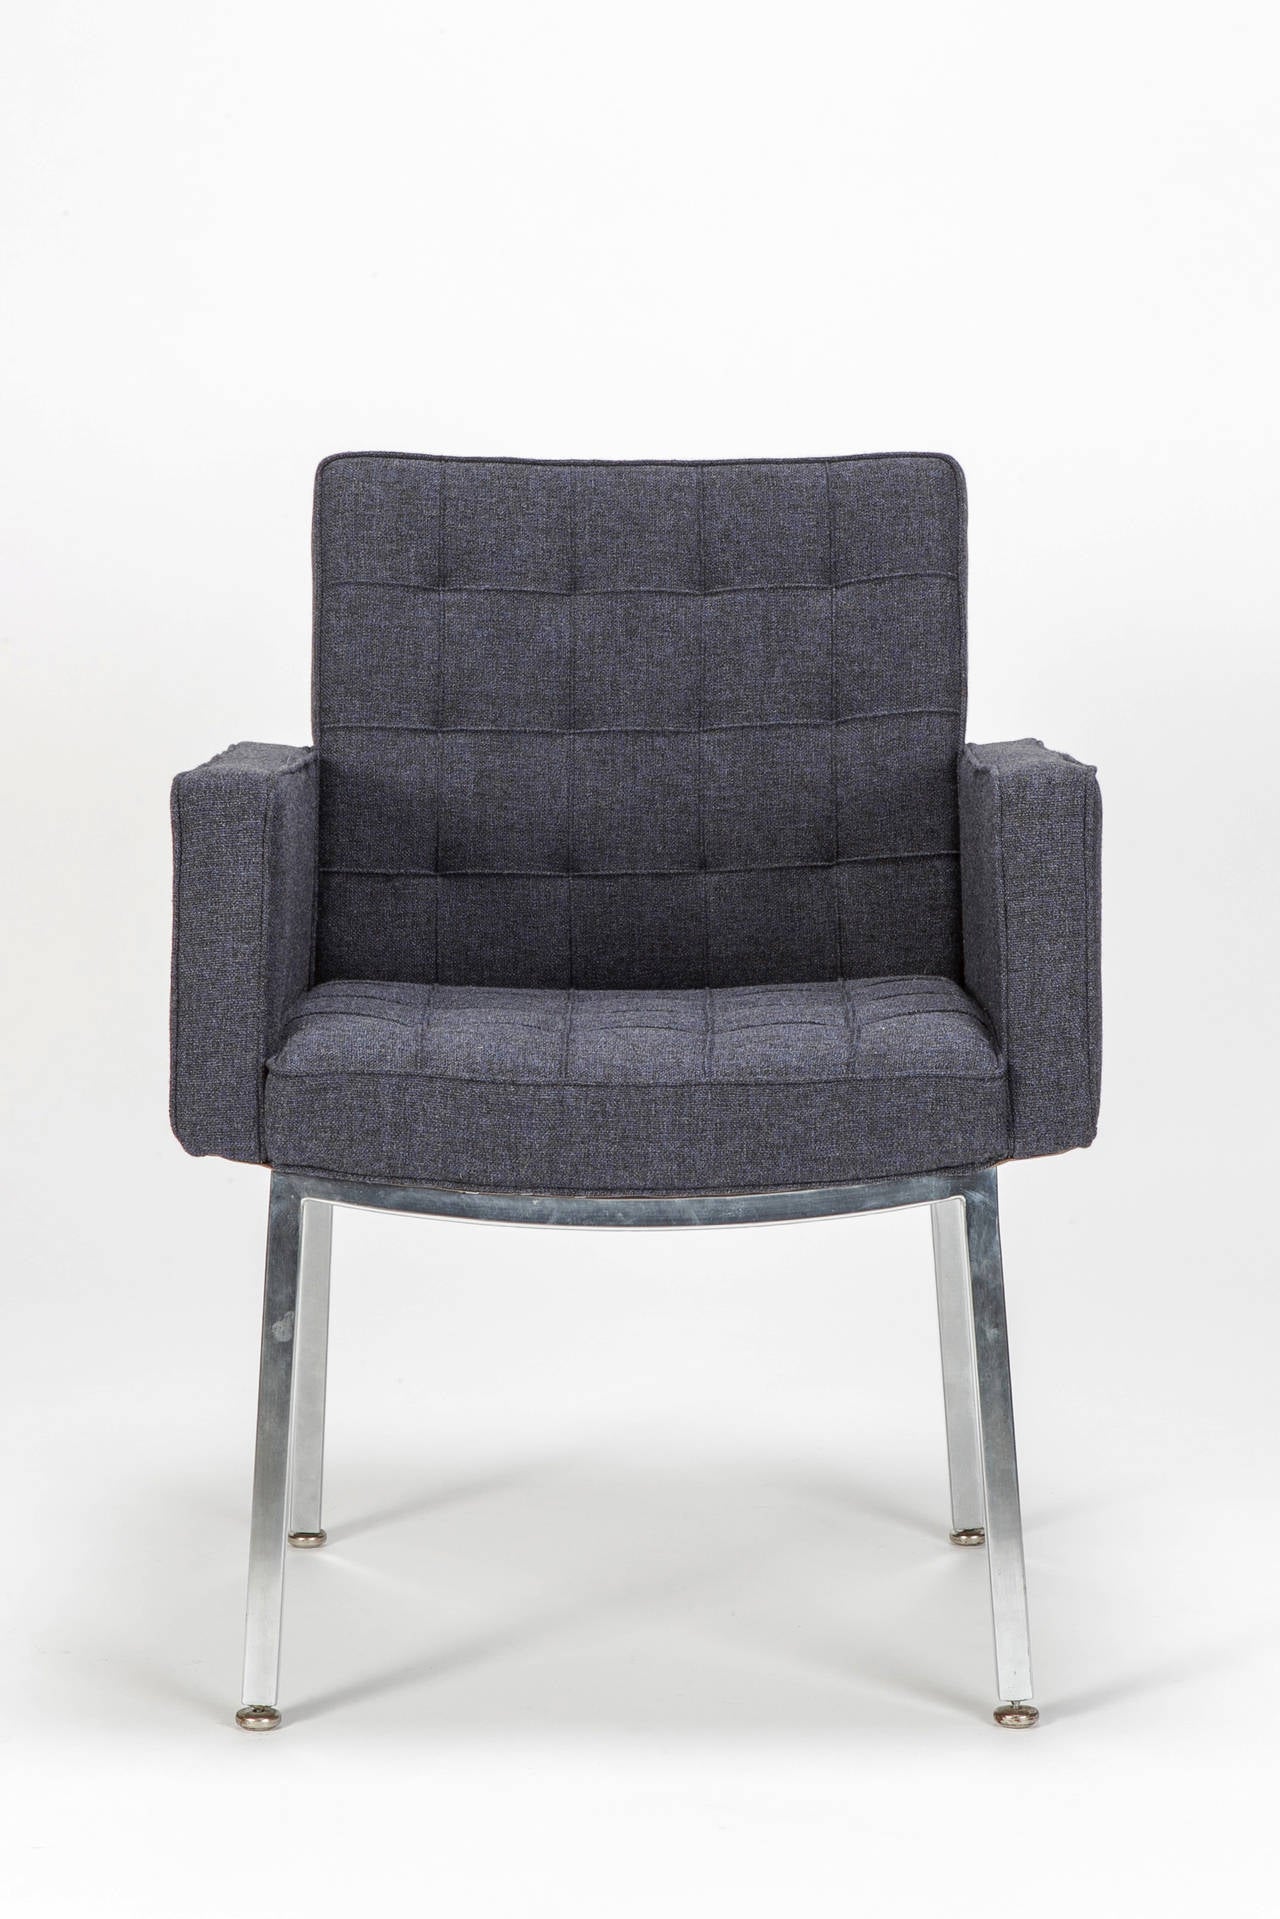 Very rare armchair designed by Vincent Cafiero for Knoll International in the 1960's. Chromed metal frame with adjustable feet, new covered with a fine cotton fabric